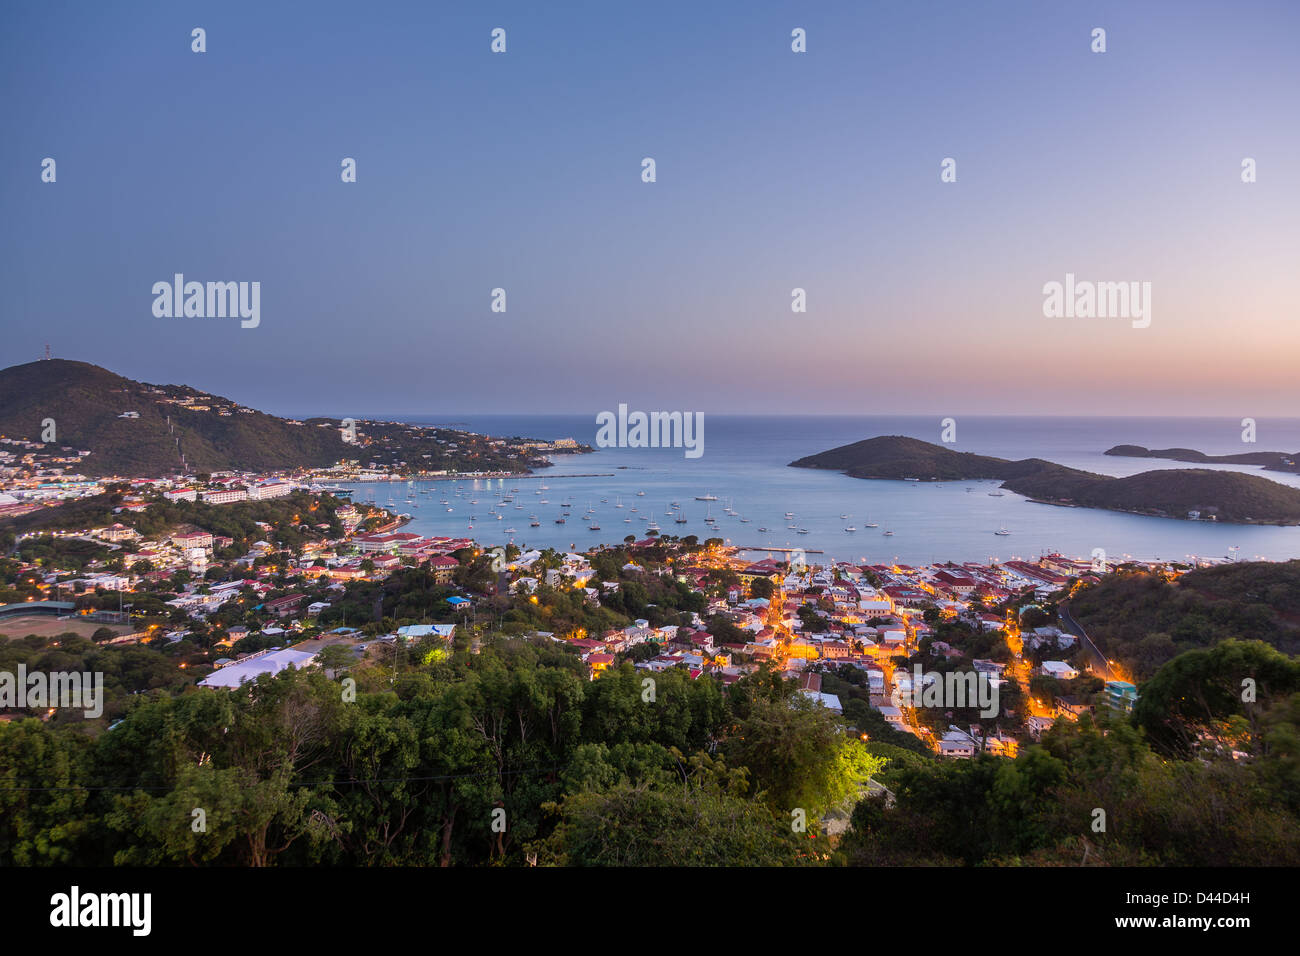 Sunset over the harbor of Charlotte Amalie in St Thomas with view over town and yachts in bay Stock Photo